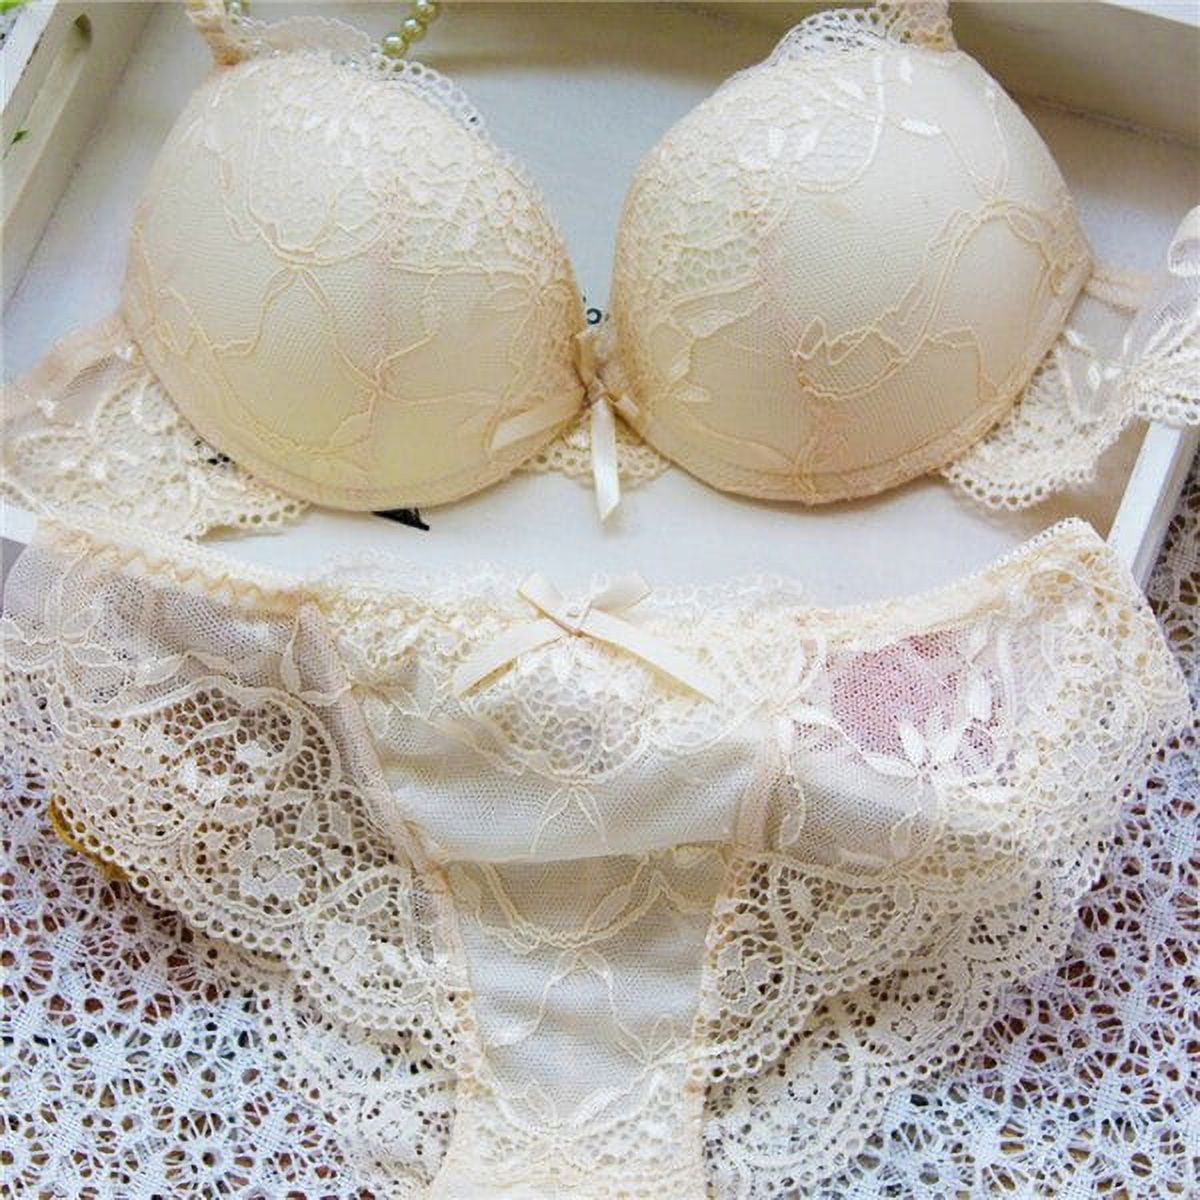 Bras Sets CYHWR French High End Brand Sexy T Pants Romantic